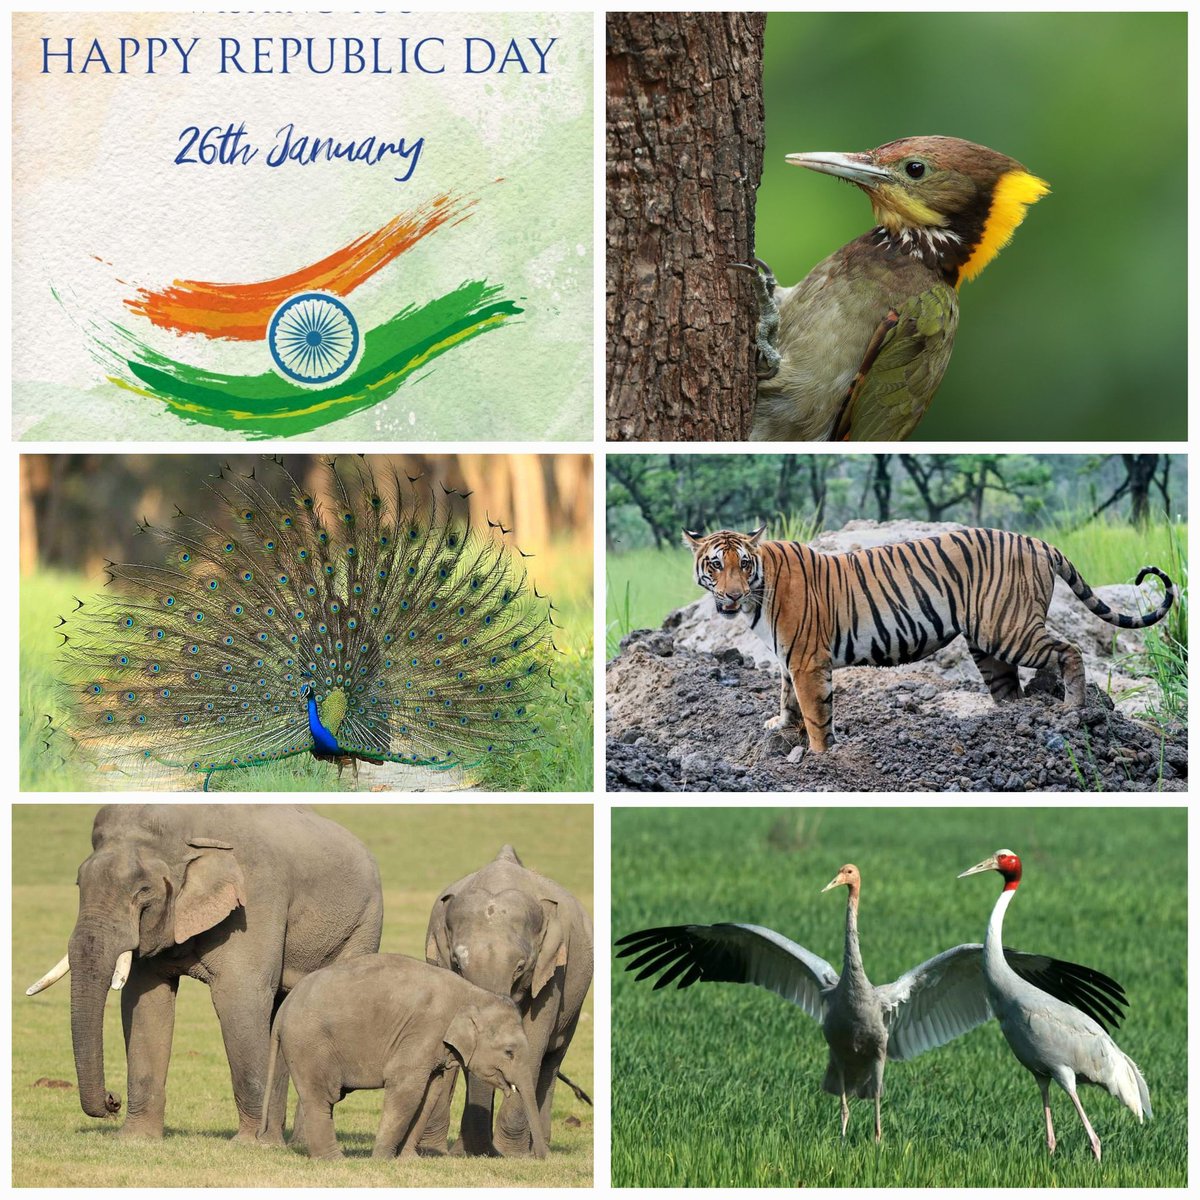 Let's join our hands together in celebration of India's 75th Republic Day. India with the largest population & workforce is working on inclusive & sustainable growth for making the planet a better place. 🇮🇳 @PMOIndia @myogiadityanath @incredibleindia @moefcc @uptourismgov